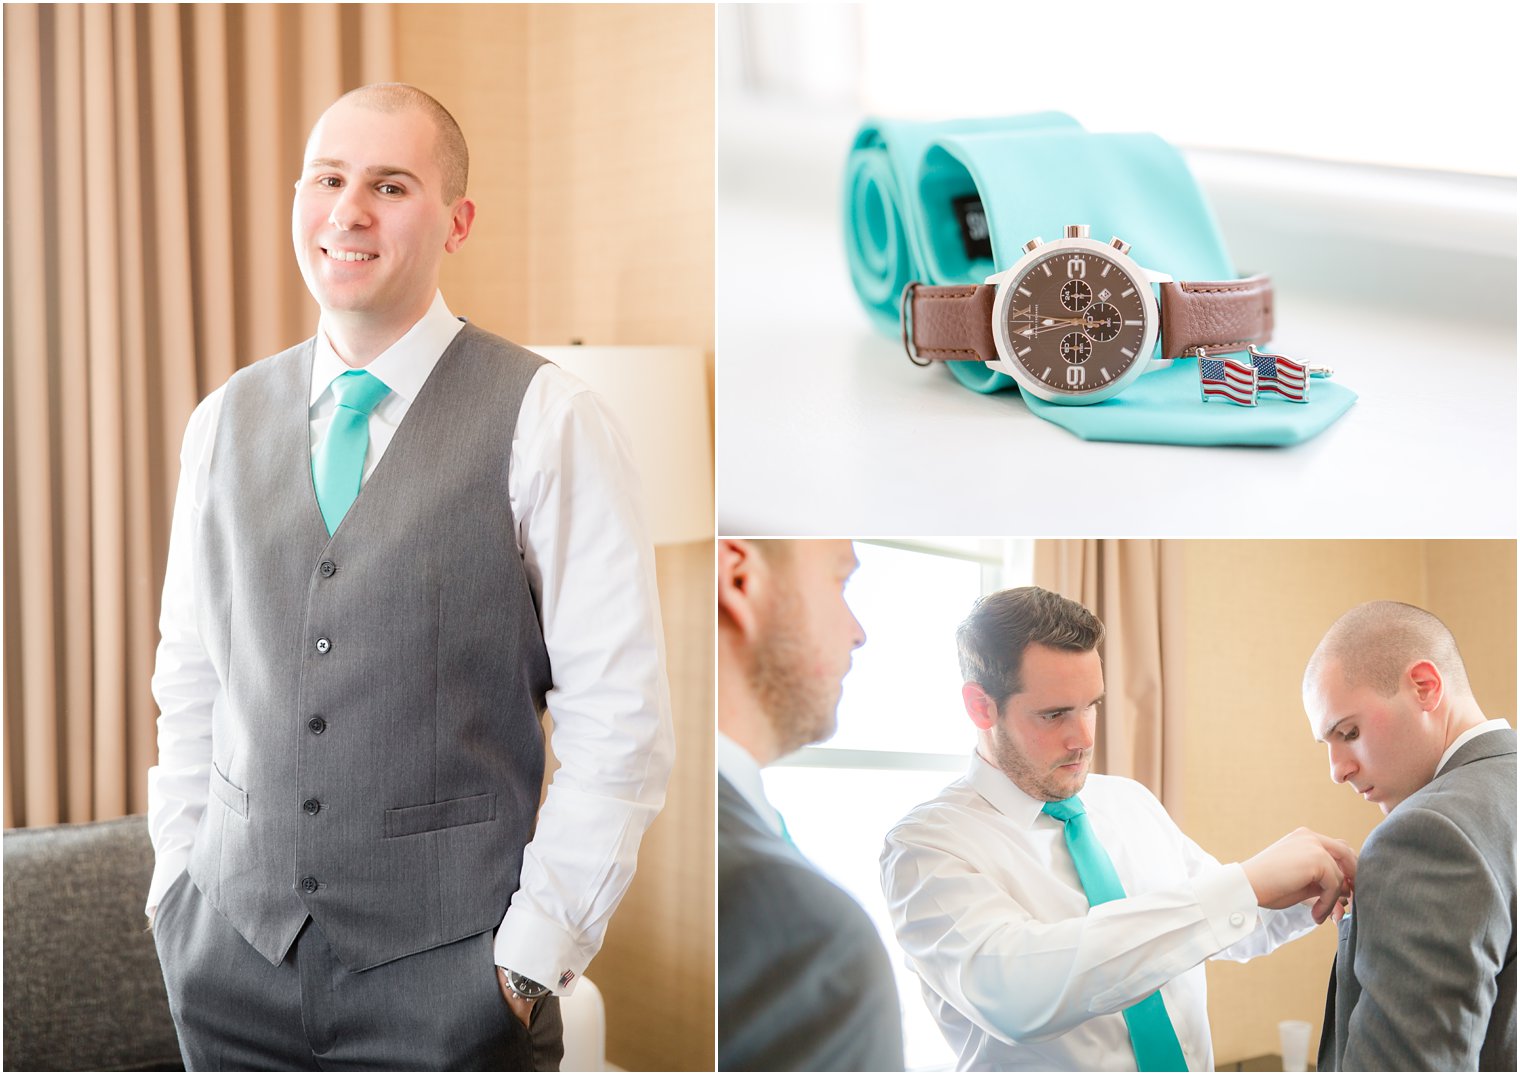 groom and groomsmen wearing teal accents